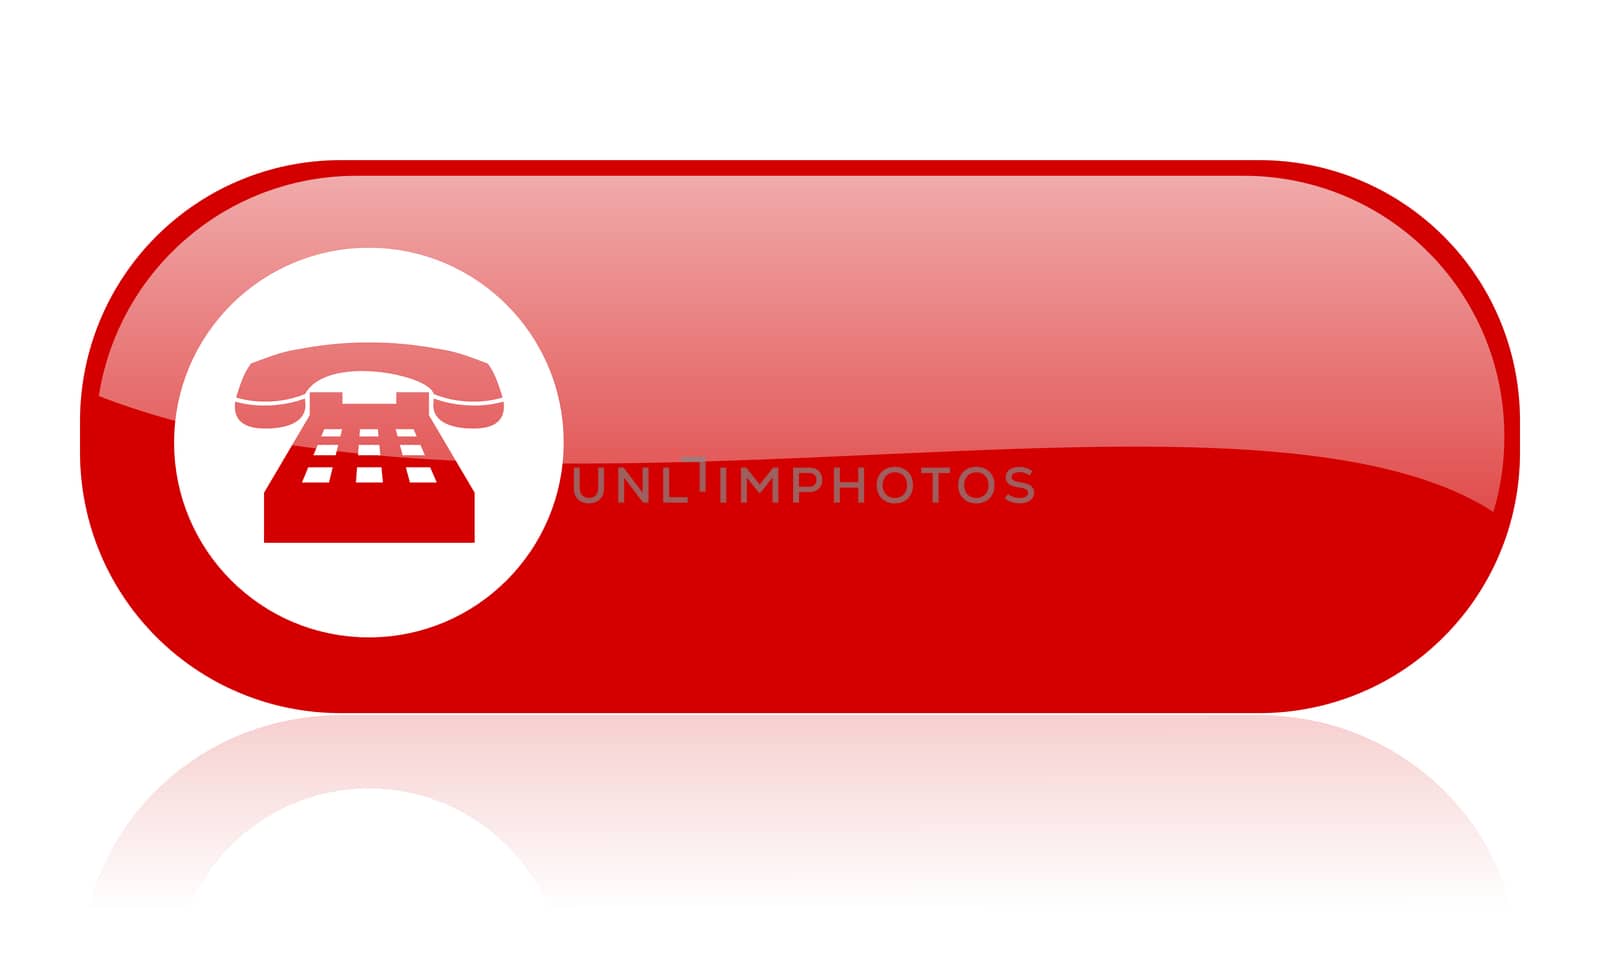 phone red web glossy icon